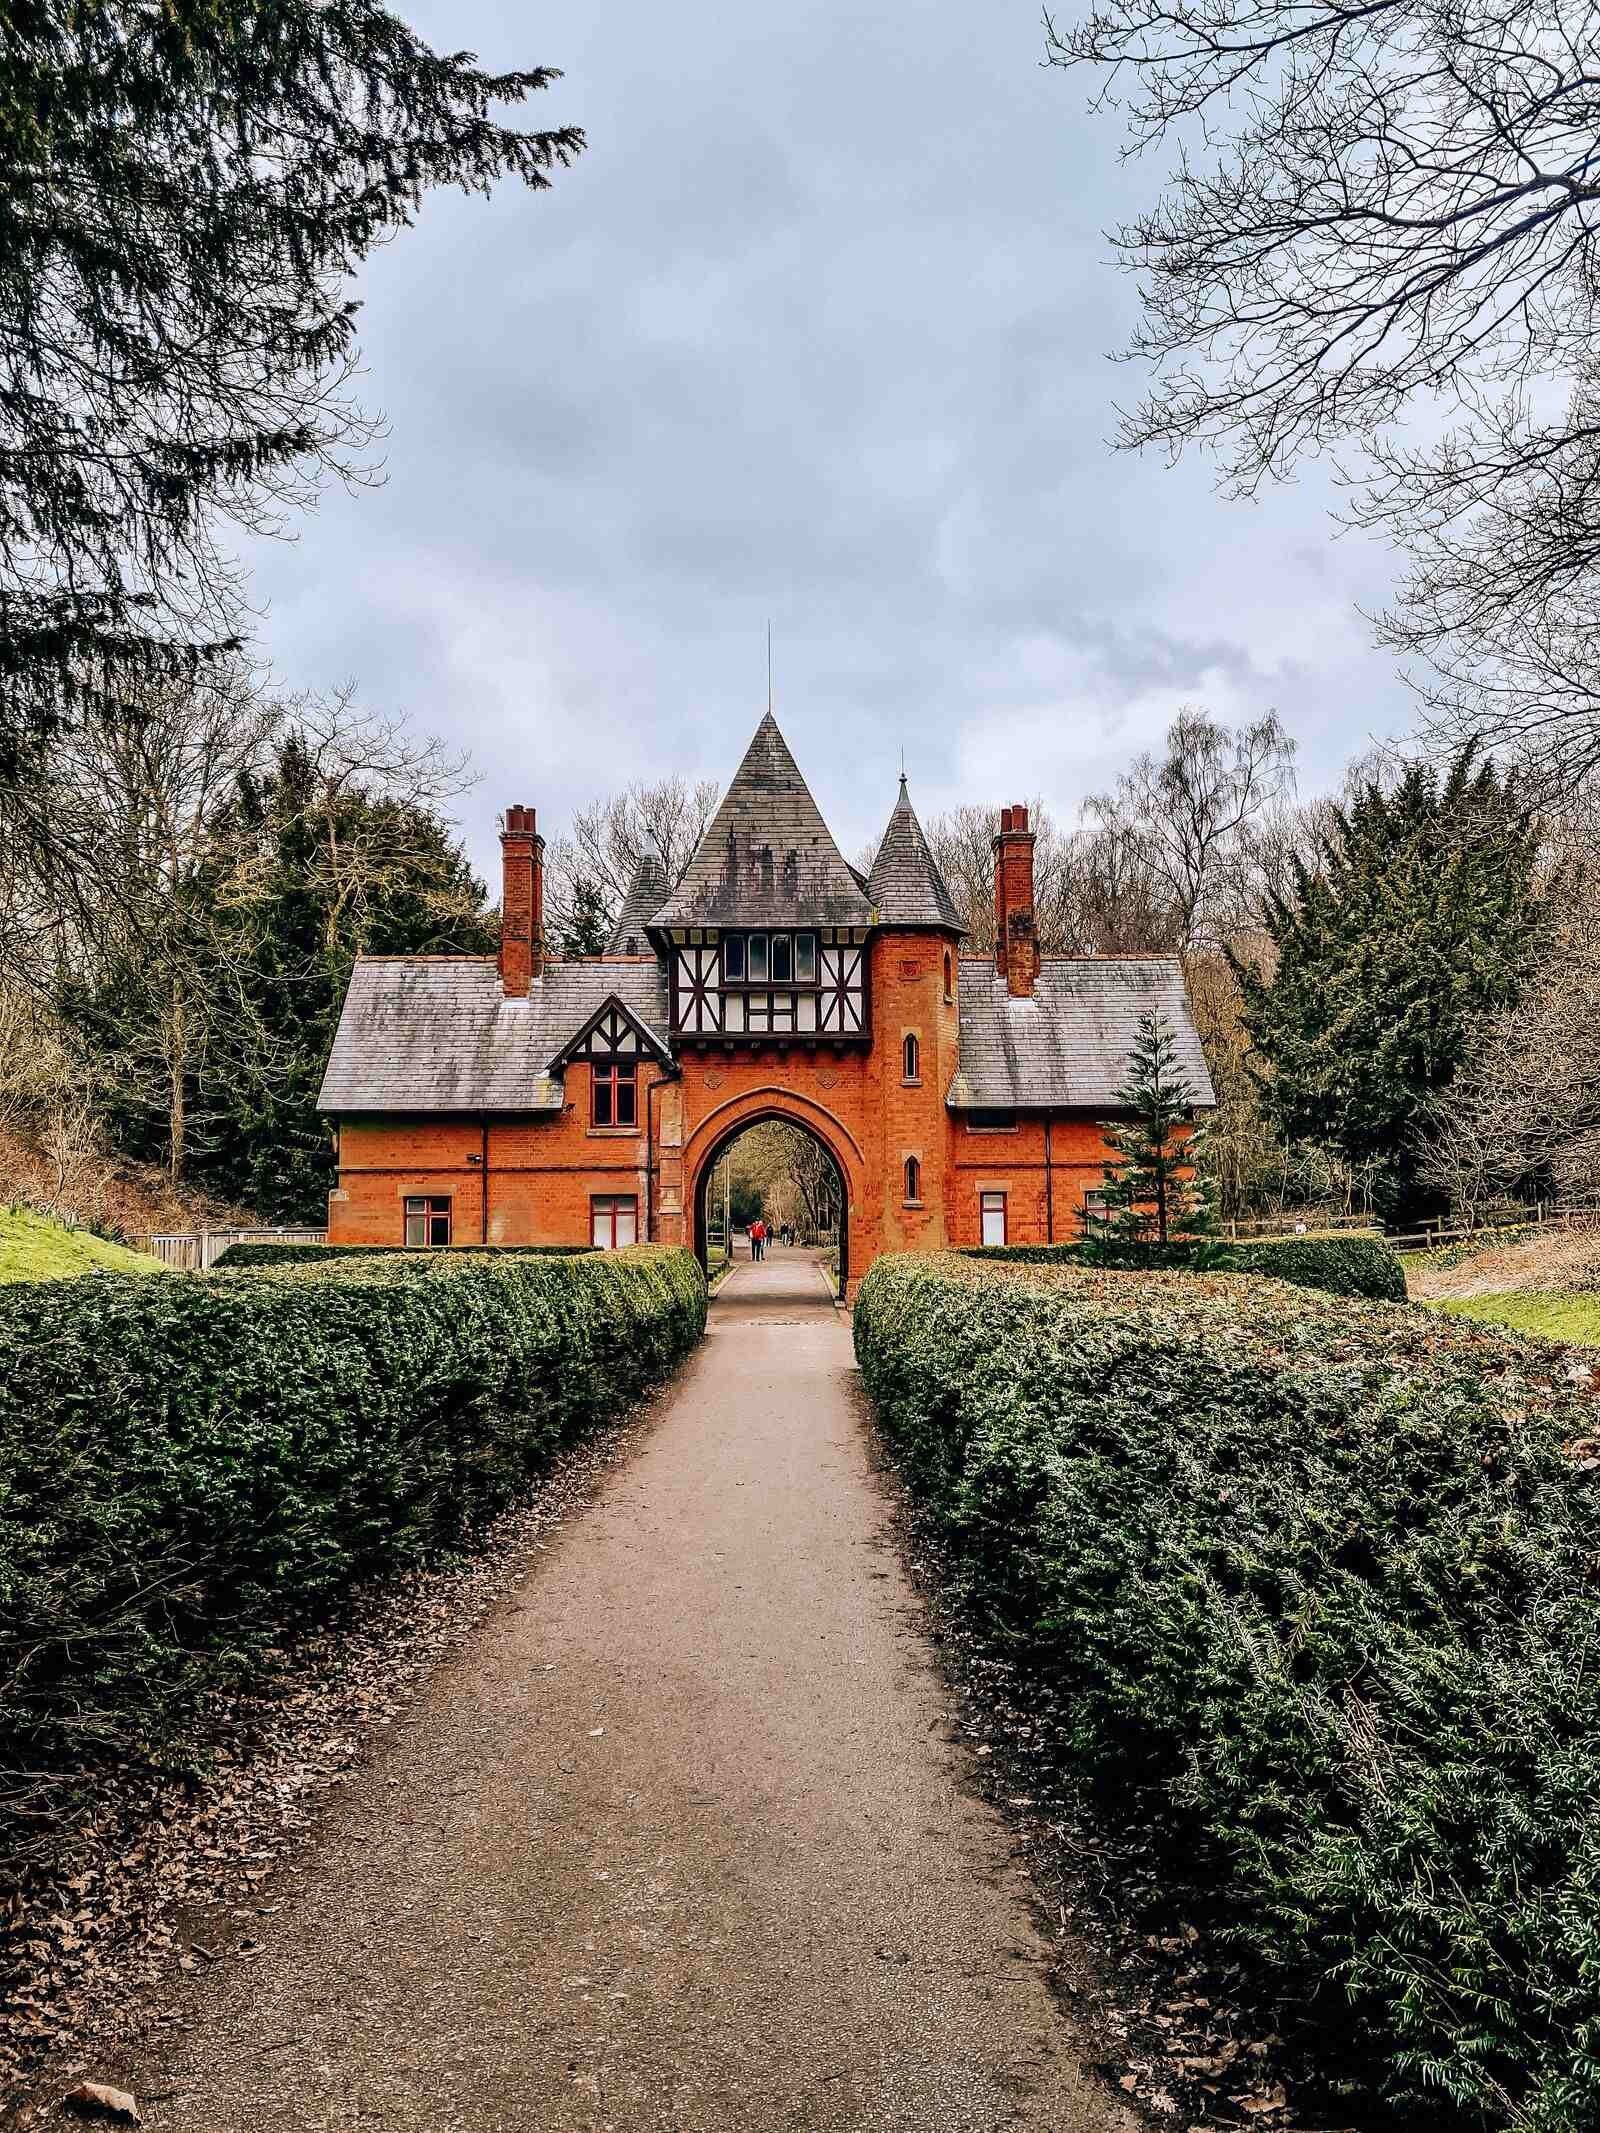 a red brick gatehouse with a timber framed roof and slate tiles. Path leading to the gae is lined with green hedges and there are trees behind the gatehouse